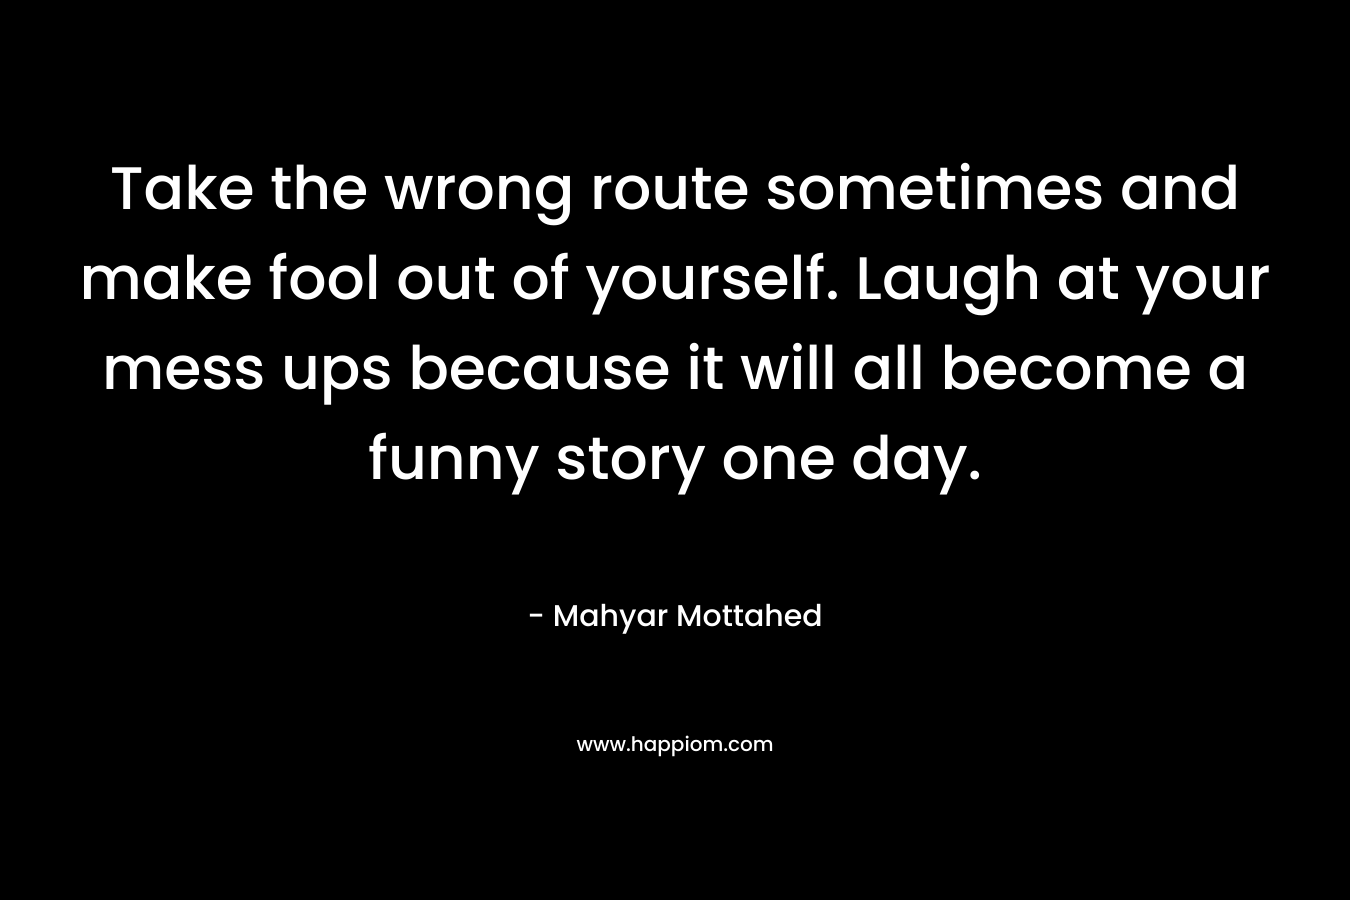 Take the wrong route sometimes and make fool out of yourself. Laugh at your mess ups because it will all become a funny story one day.